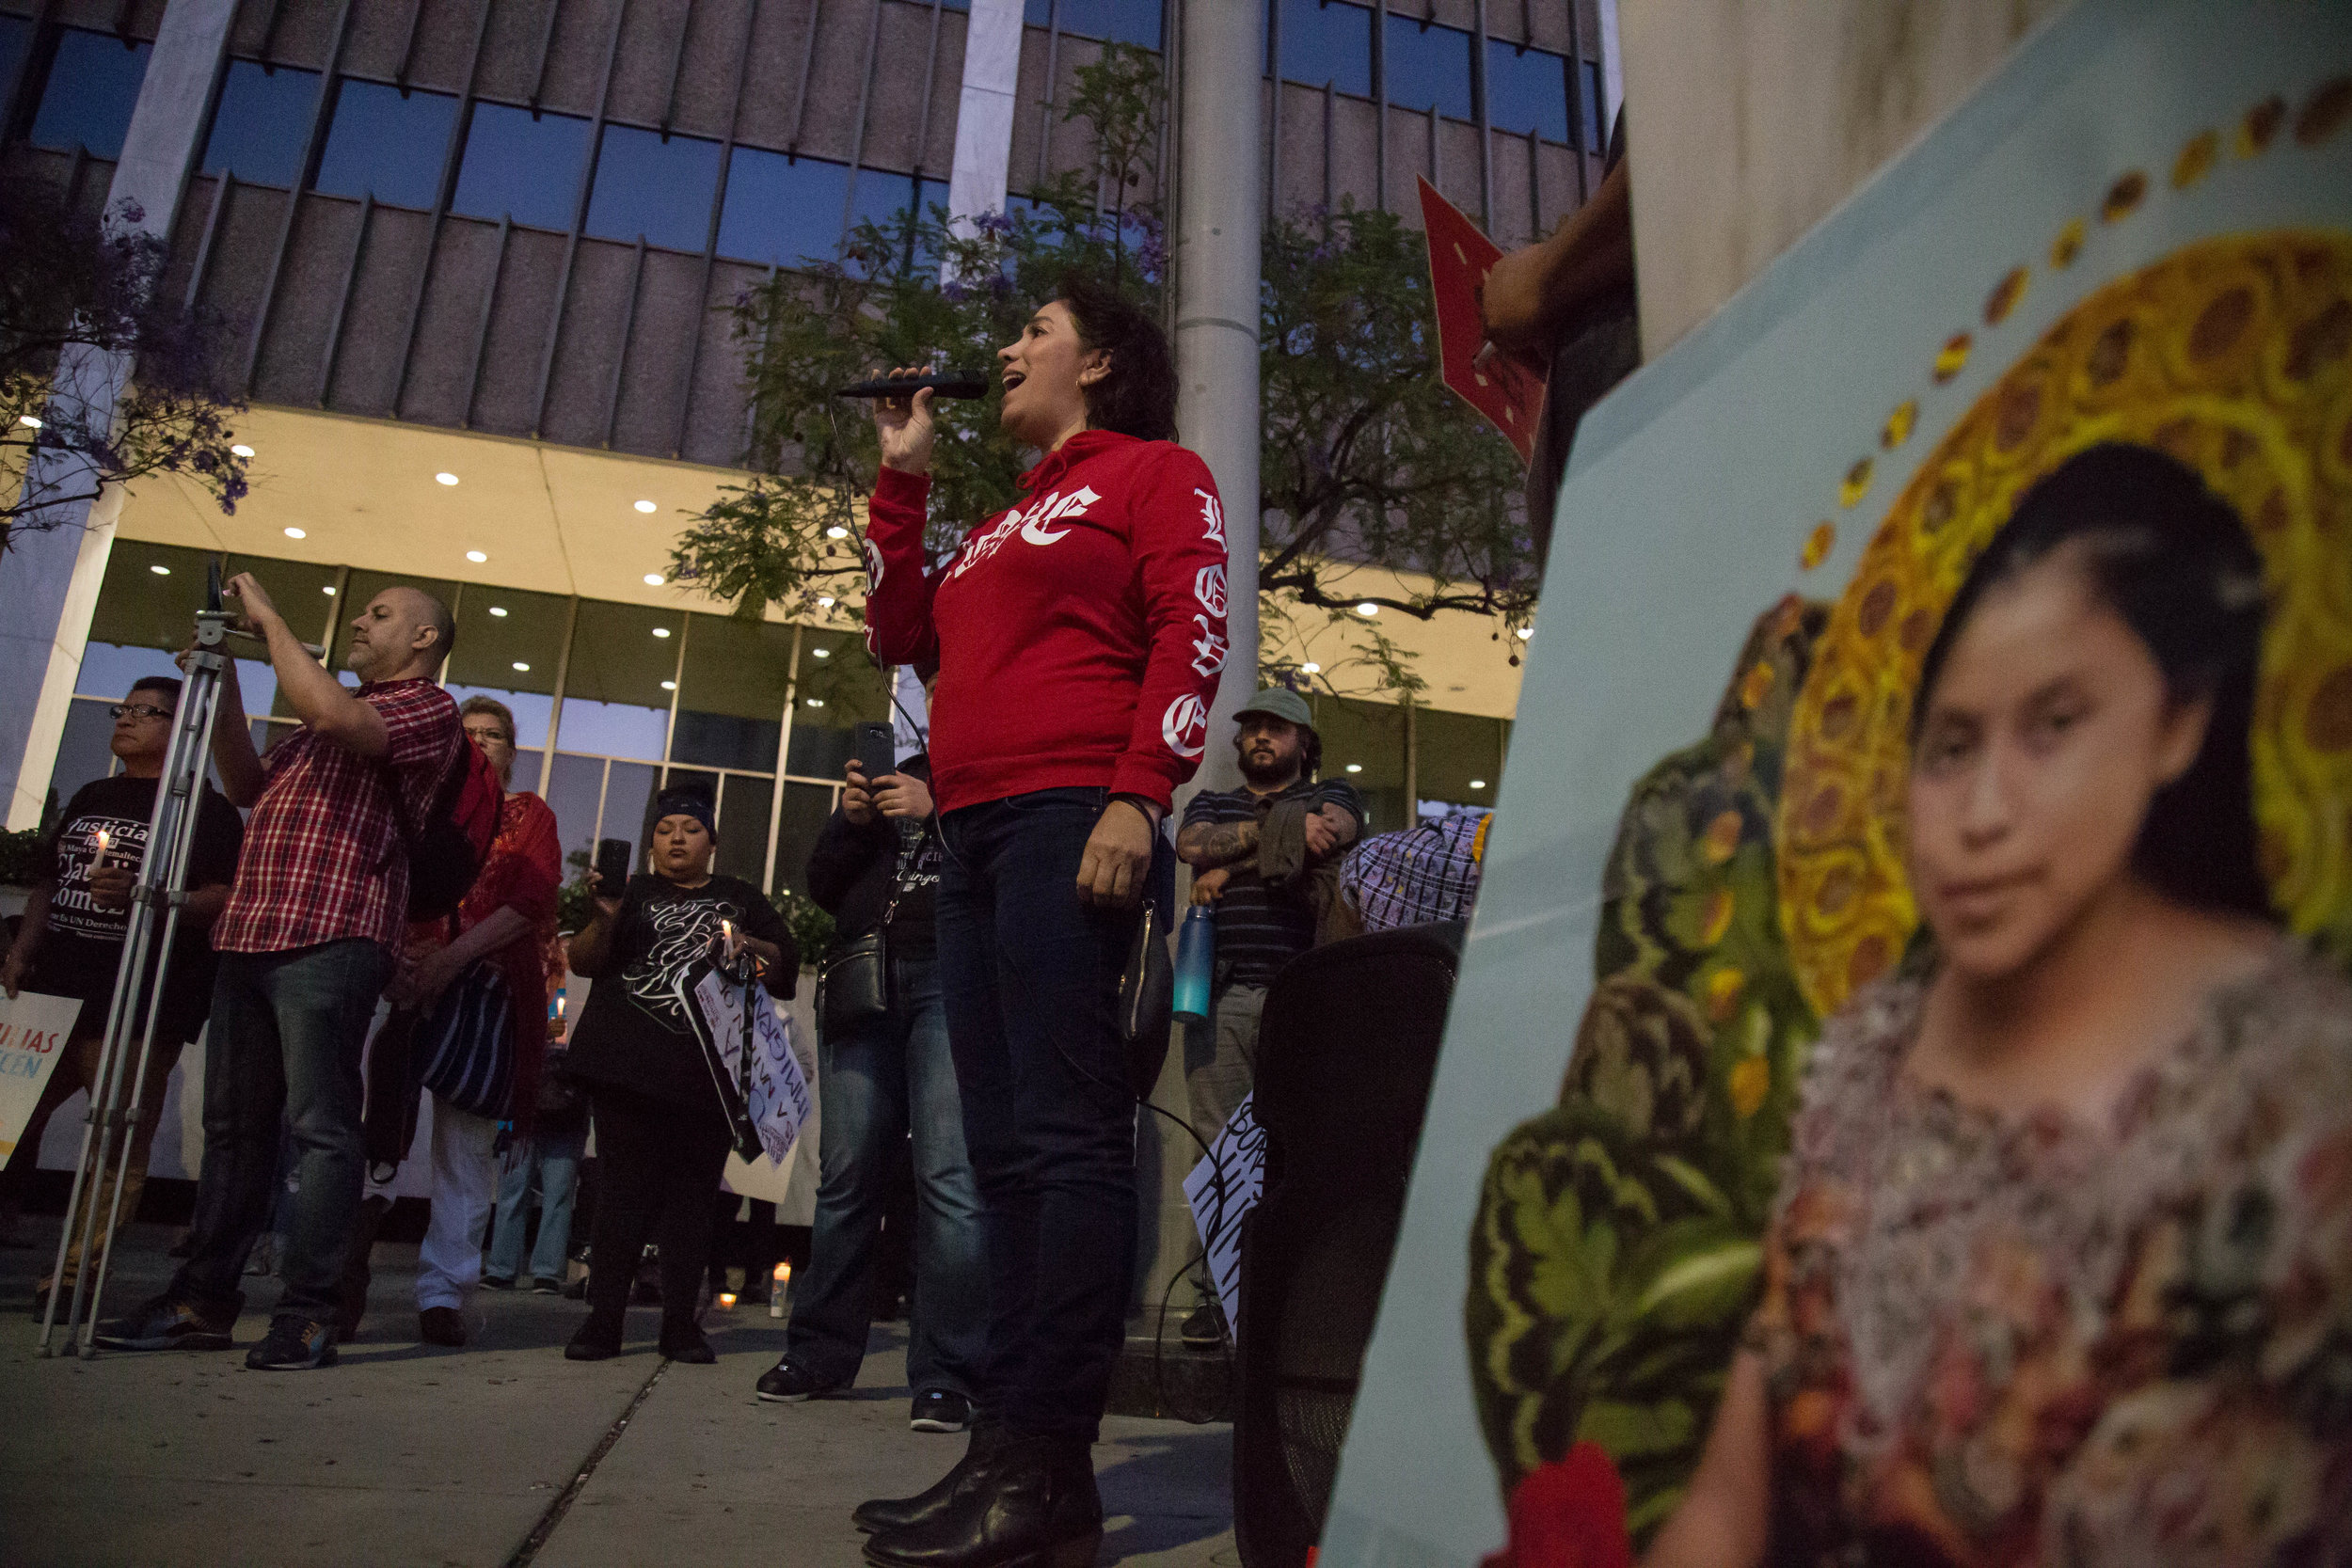  One of the participants of "Justice for Claudia and All kidnapped Indigenous children!" gives a speech in front of United States Citizenship and Immigration building in Downtown Los Angeles, California on June 1st, 2018. (Yuki Iwamura/Corsair Contri